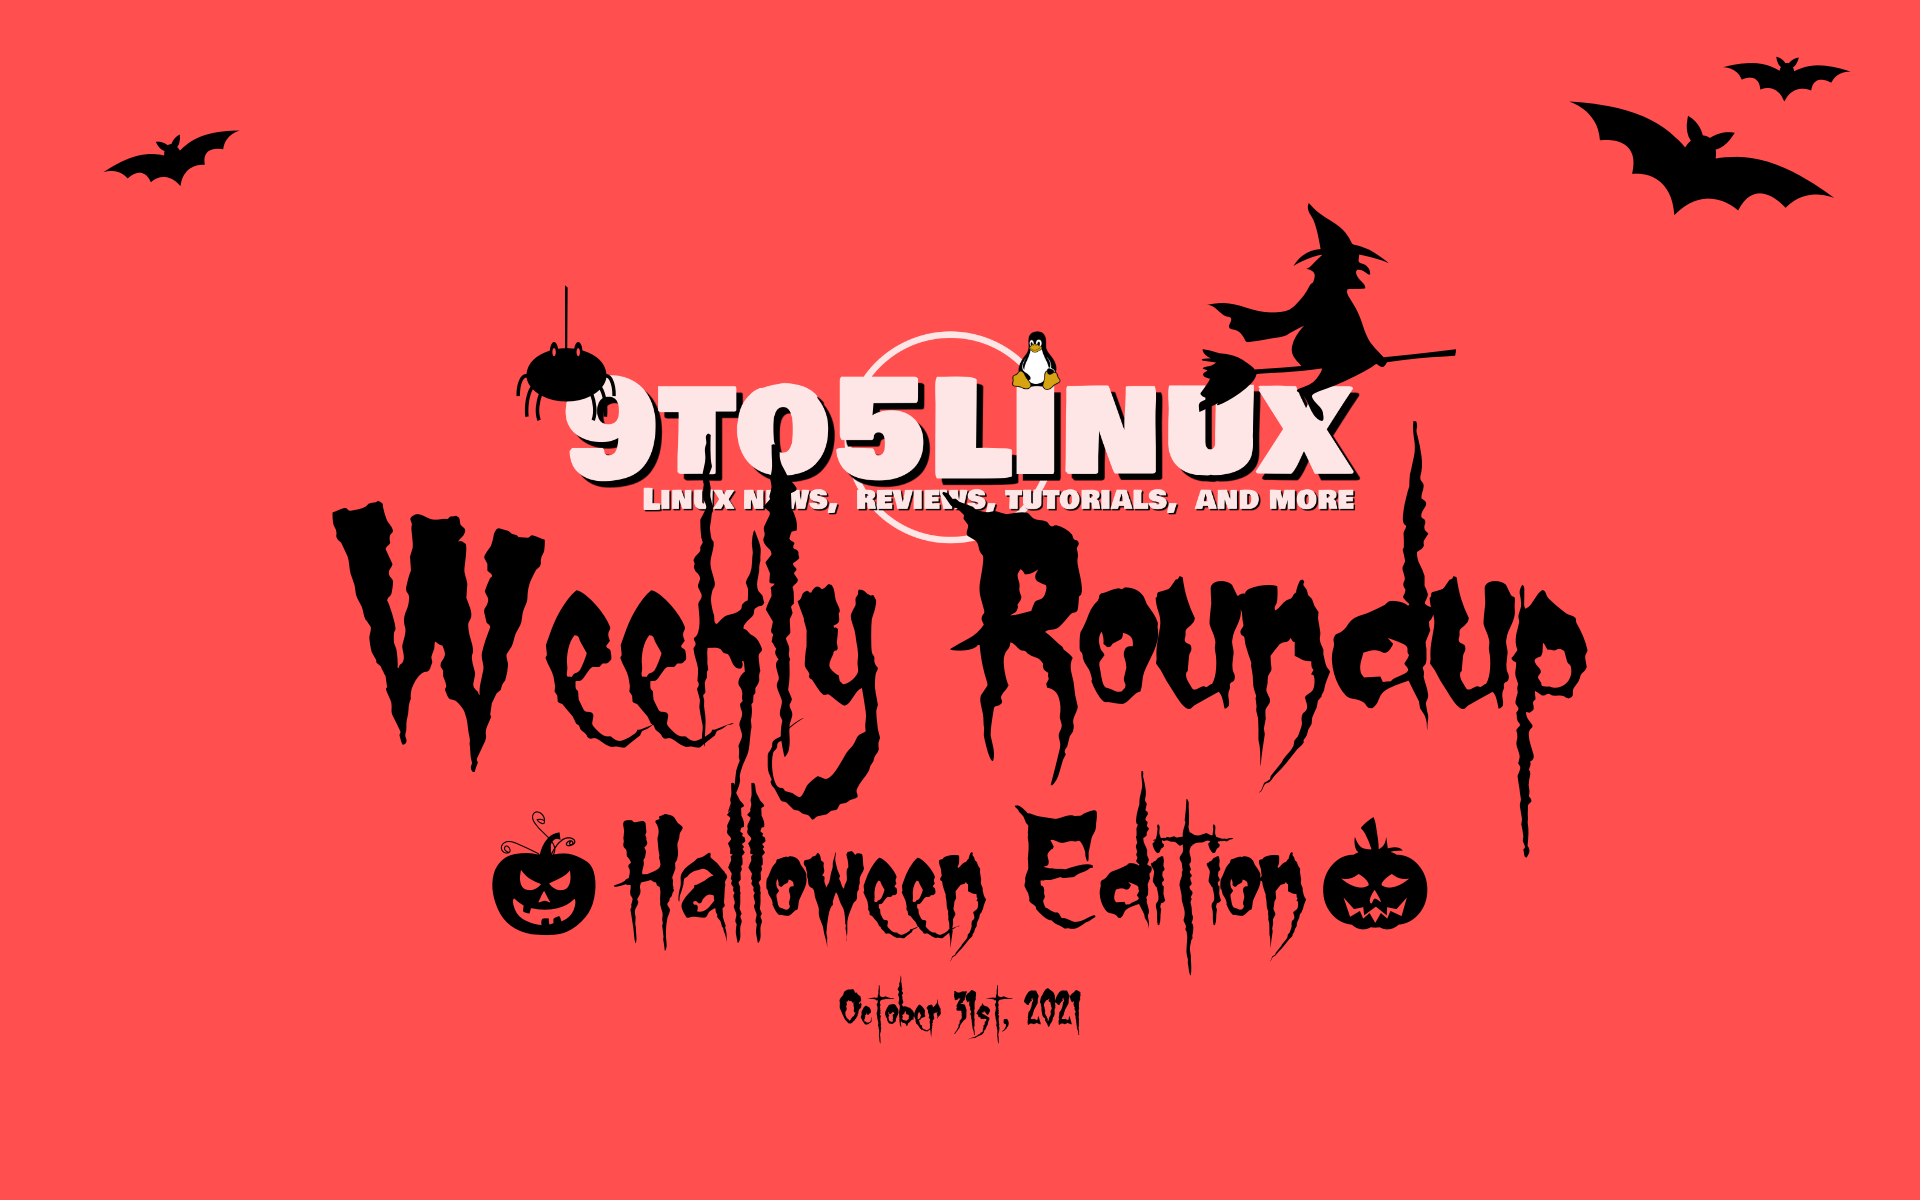 9to5Linux Weekly Roundup: “Halloween Edition”